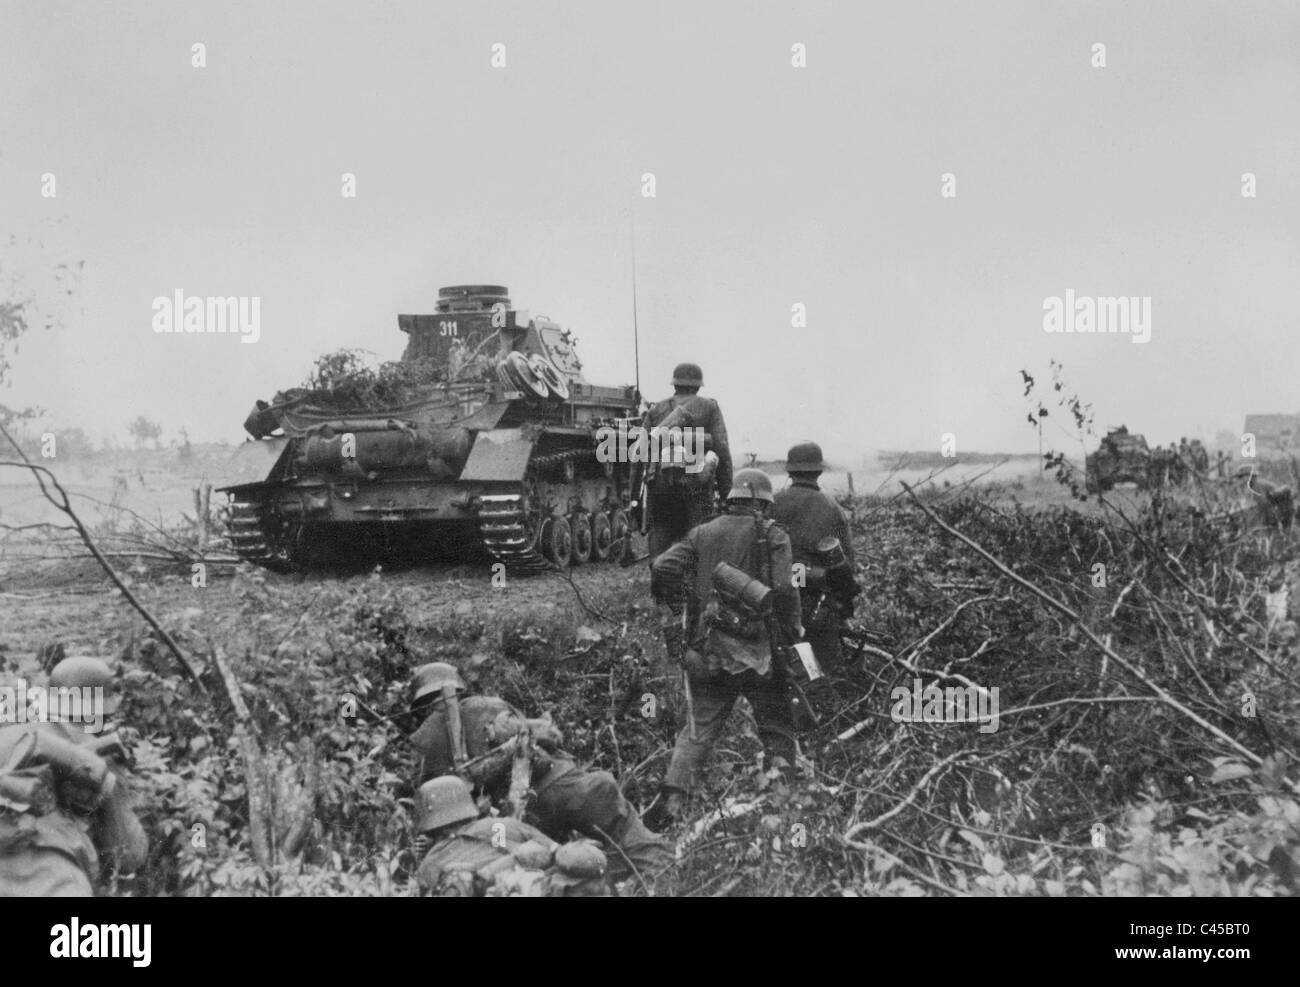 Nazi German soldiers and tank on the Eastern front, 1941 Stock Photo